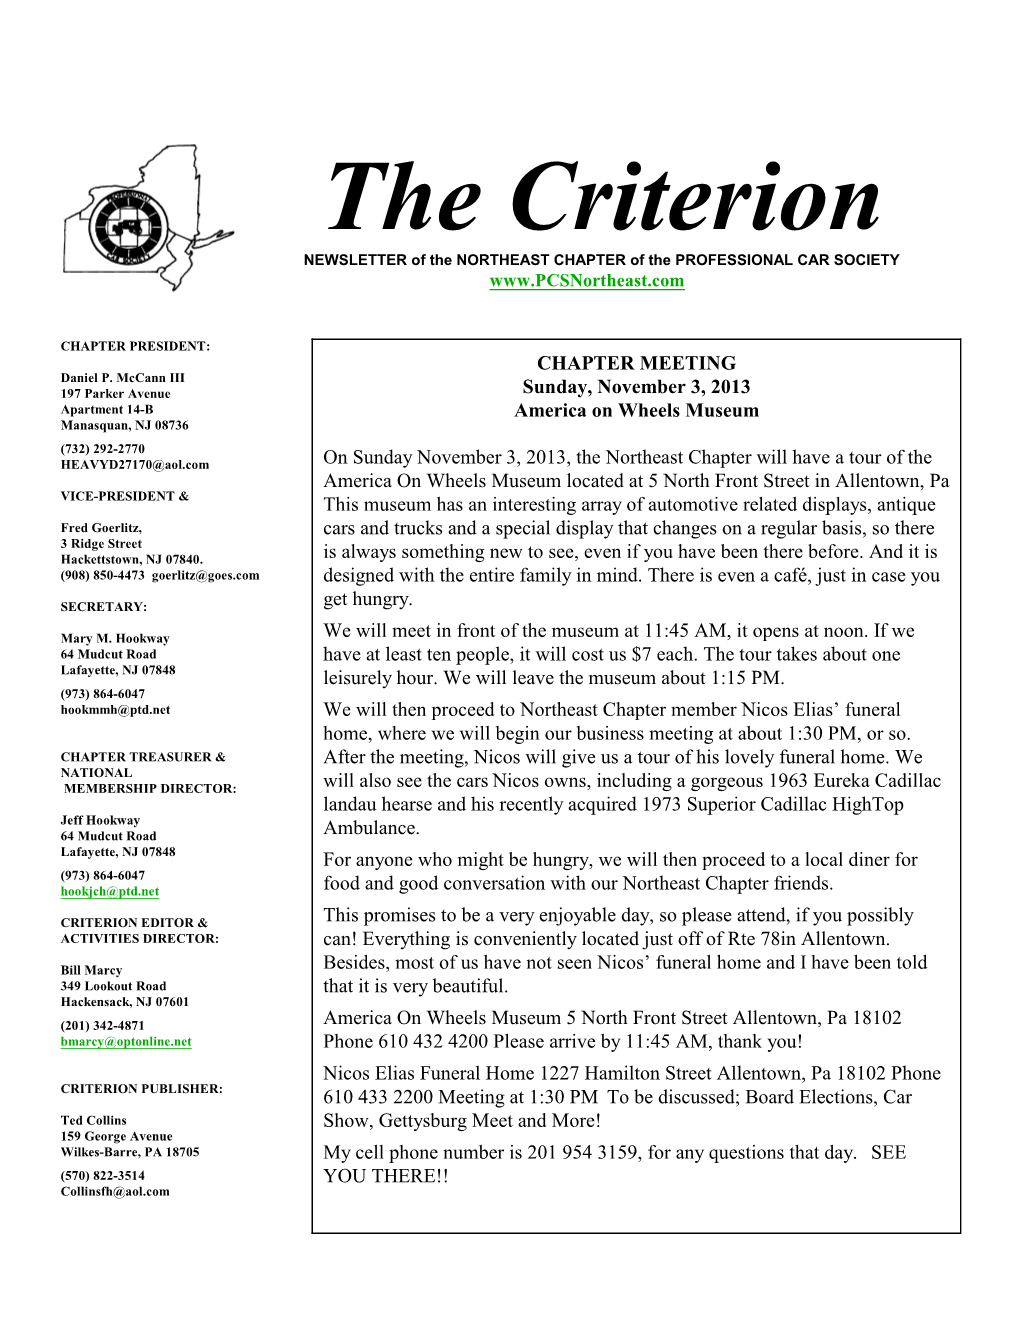 The Criterion NEWSLETTER of the NORTHEAST CHAPTER of the PROFESSIONAL CAR SOCIETY